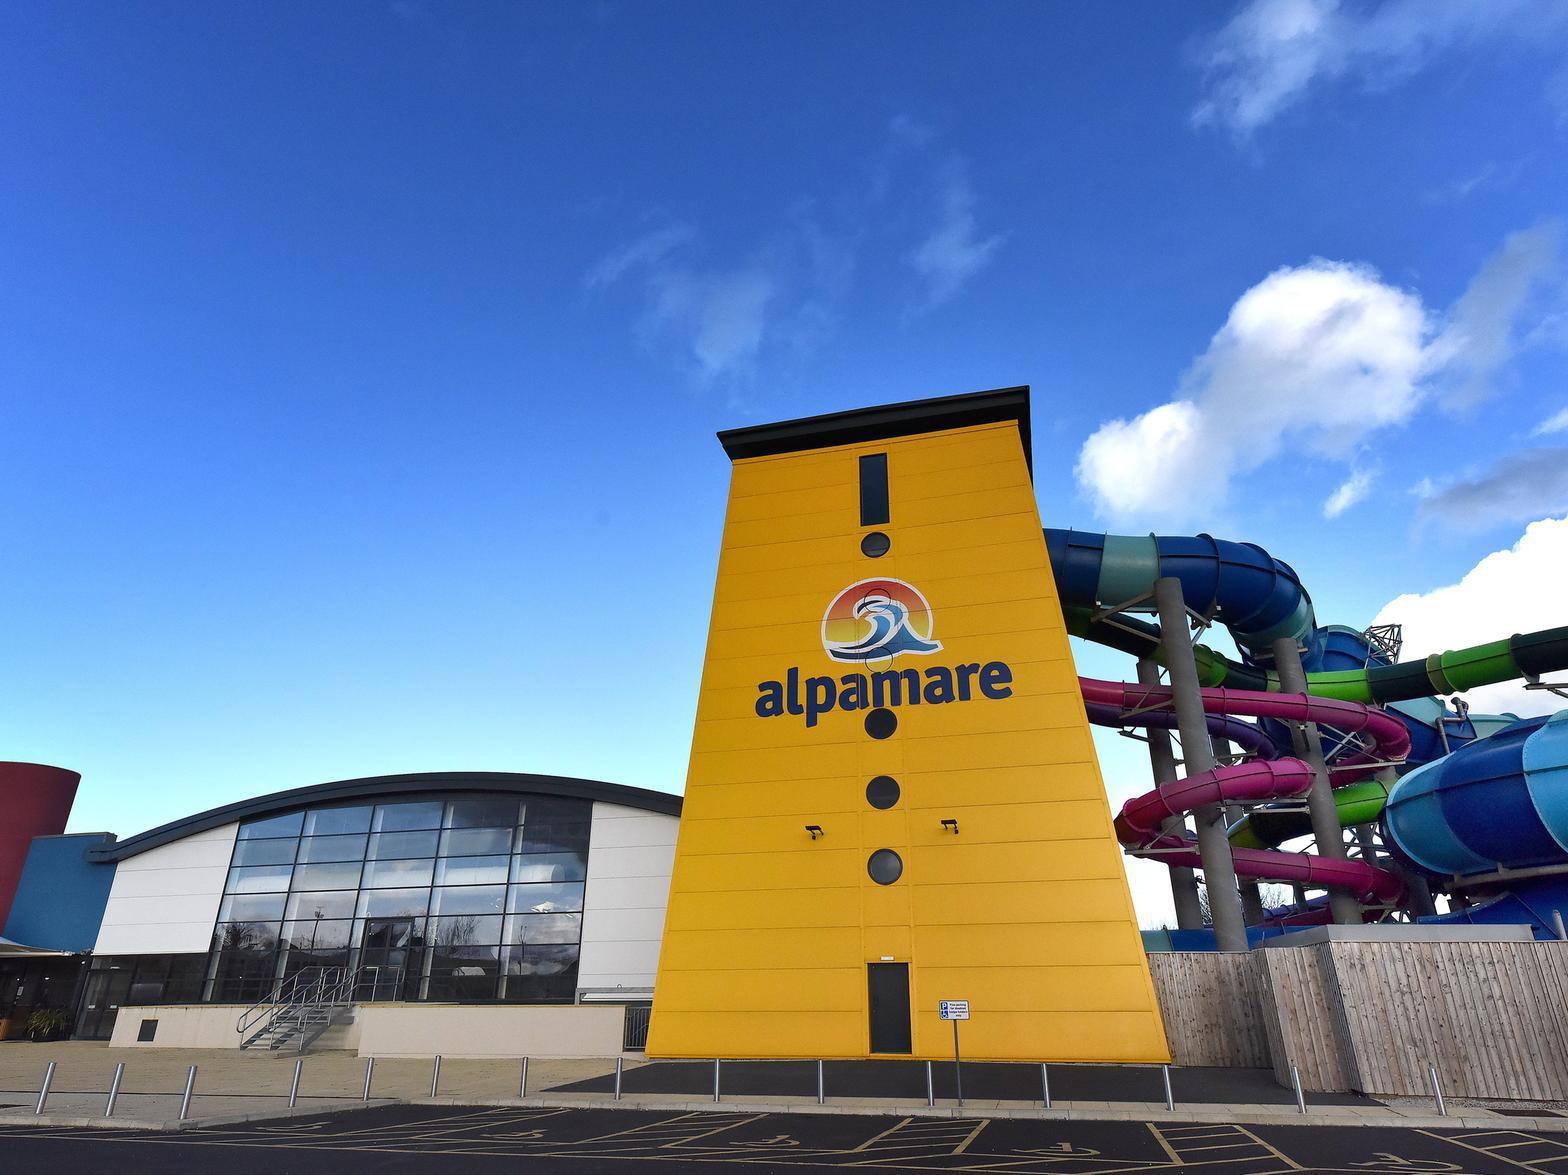 The future of Alpamare was called into question when a creditor issued a winding-up petition against the operator. This was withdrawn and the new spa opened later in the year